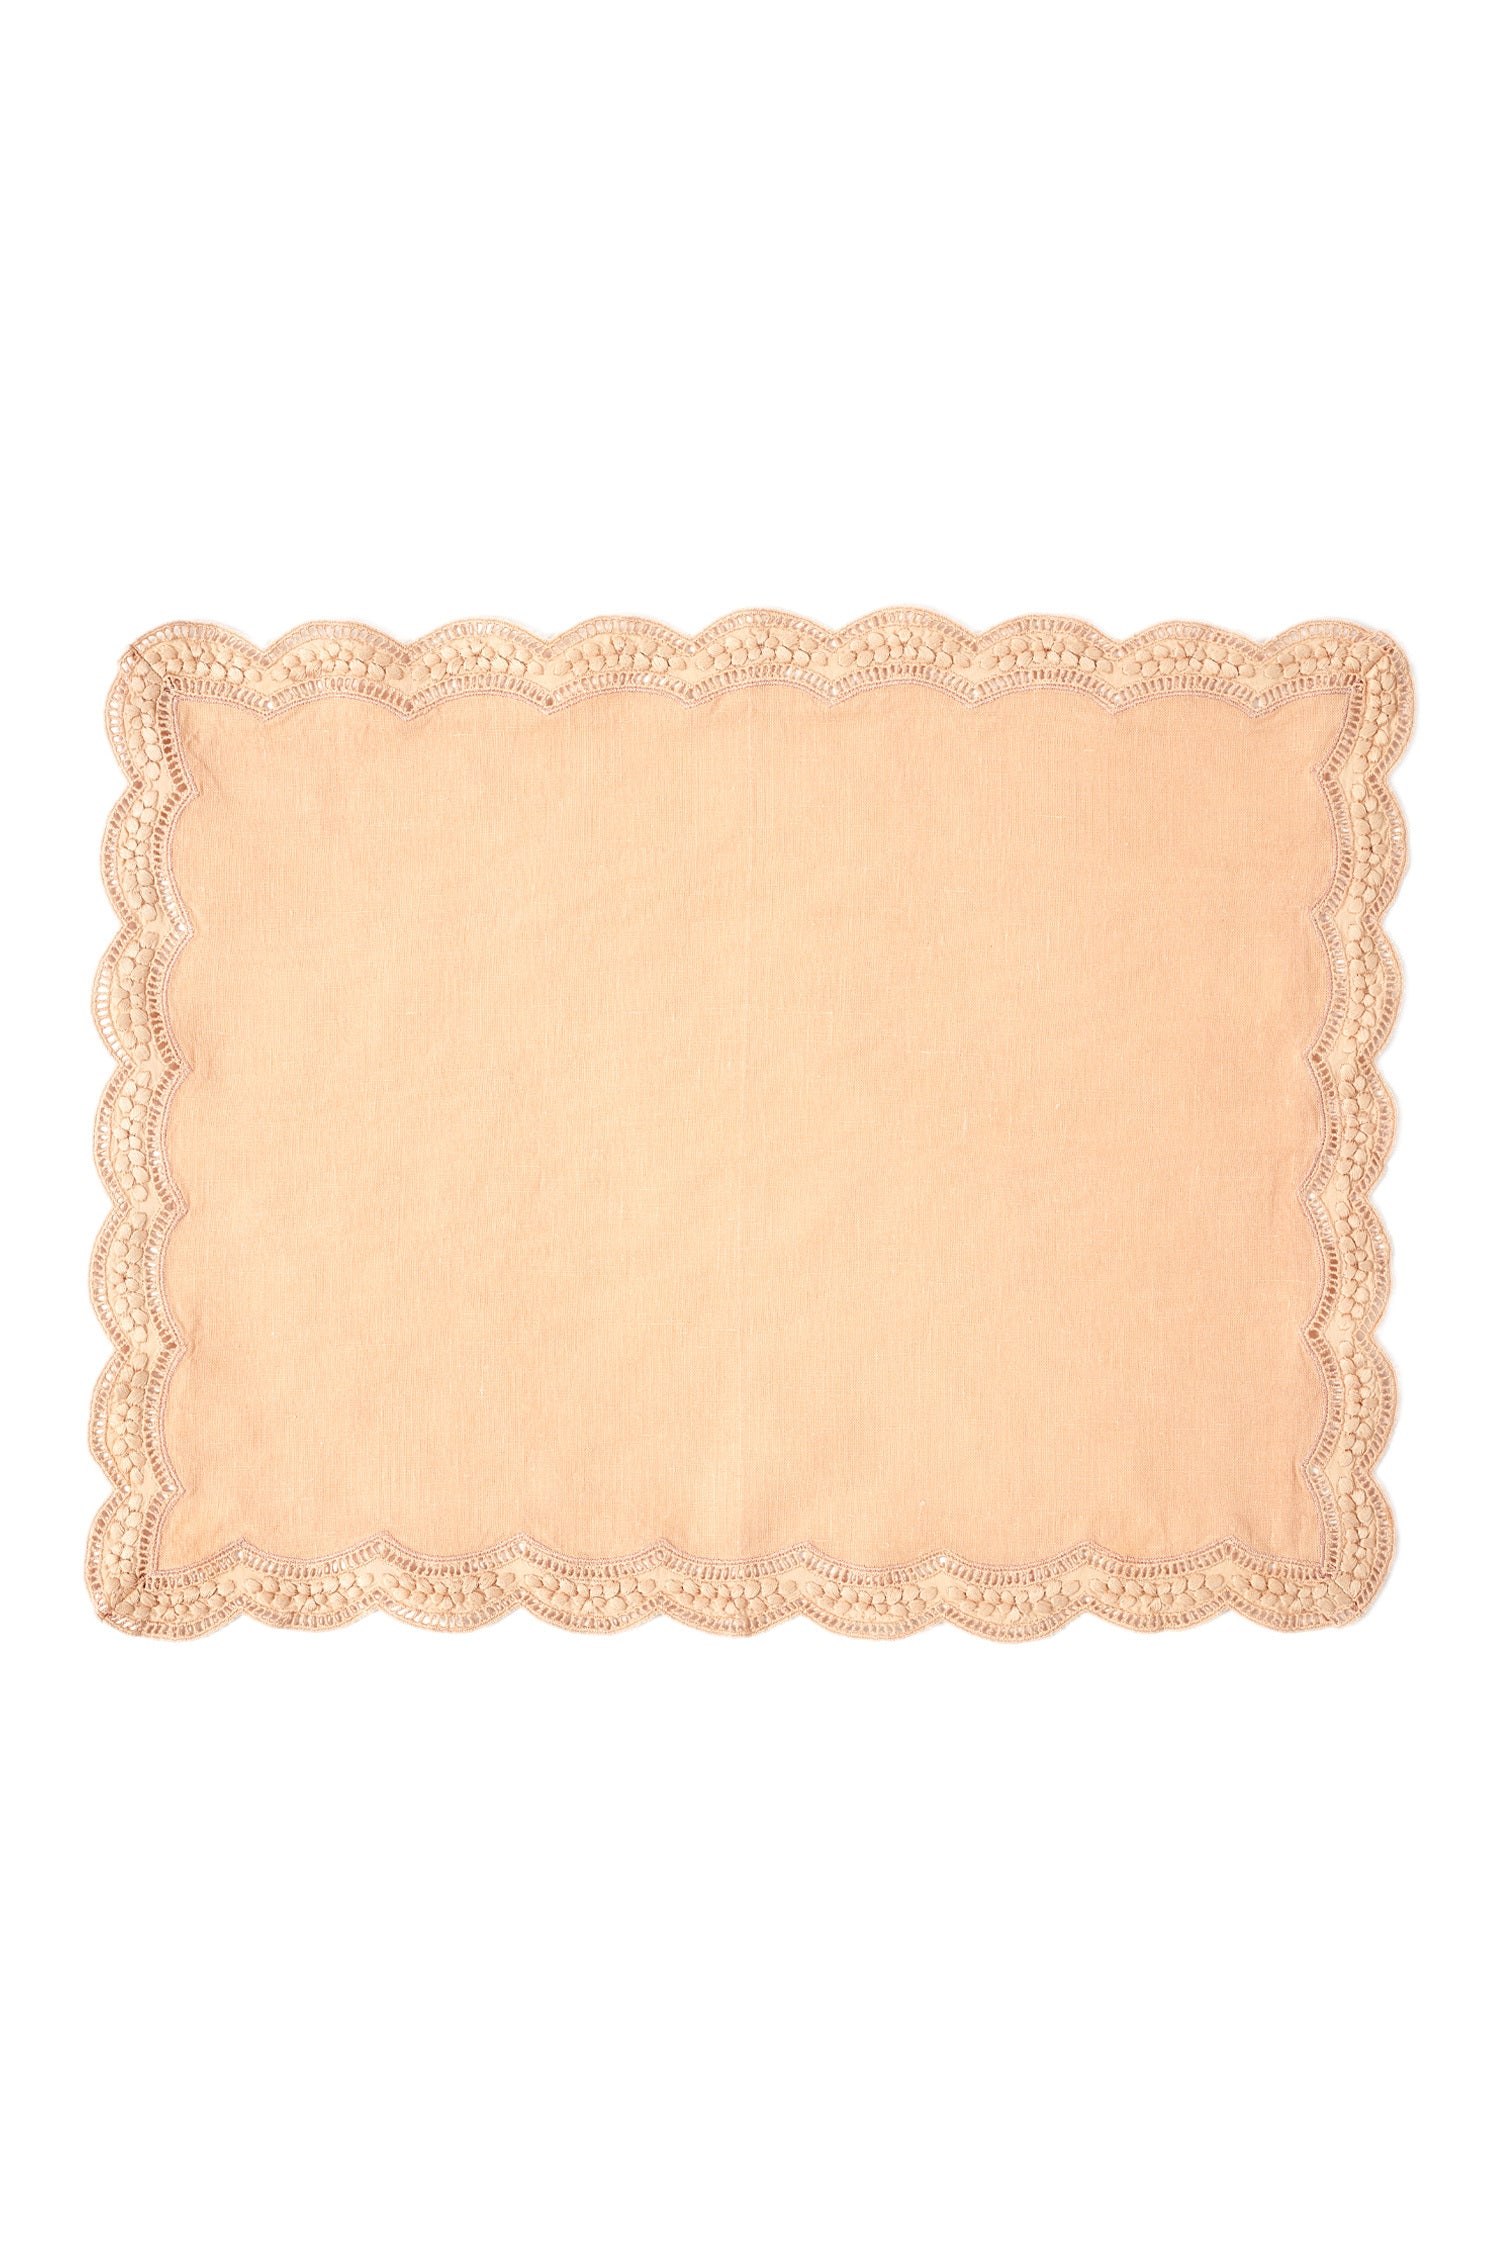 Ulla Johnson Scallop Embroidered Placemat - Blush